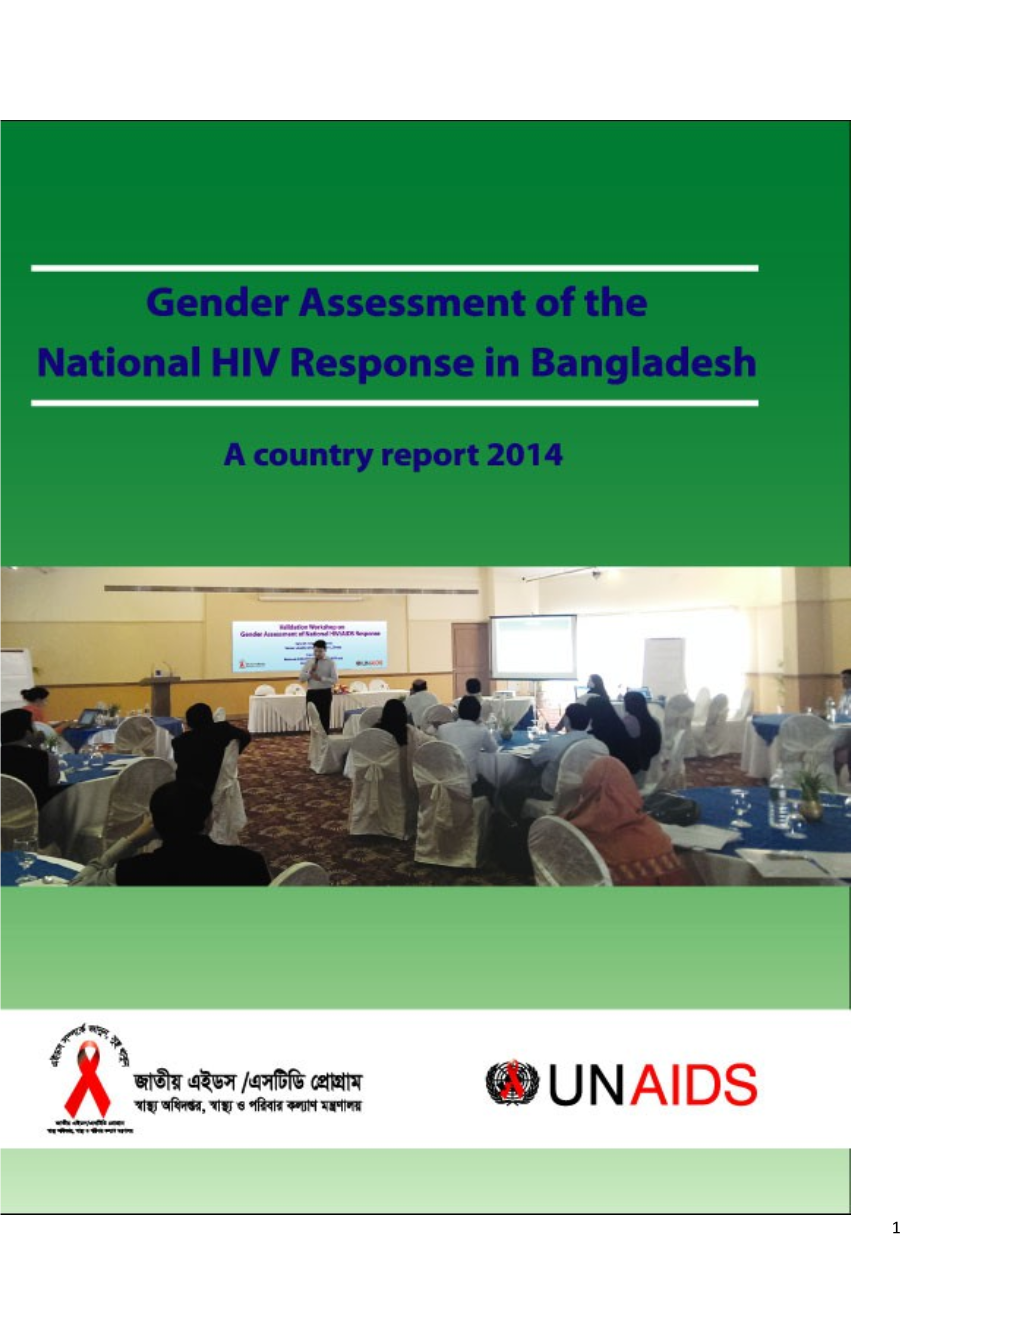 Gender Assessment of the National HIV Response in Bangladesh